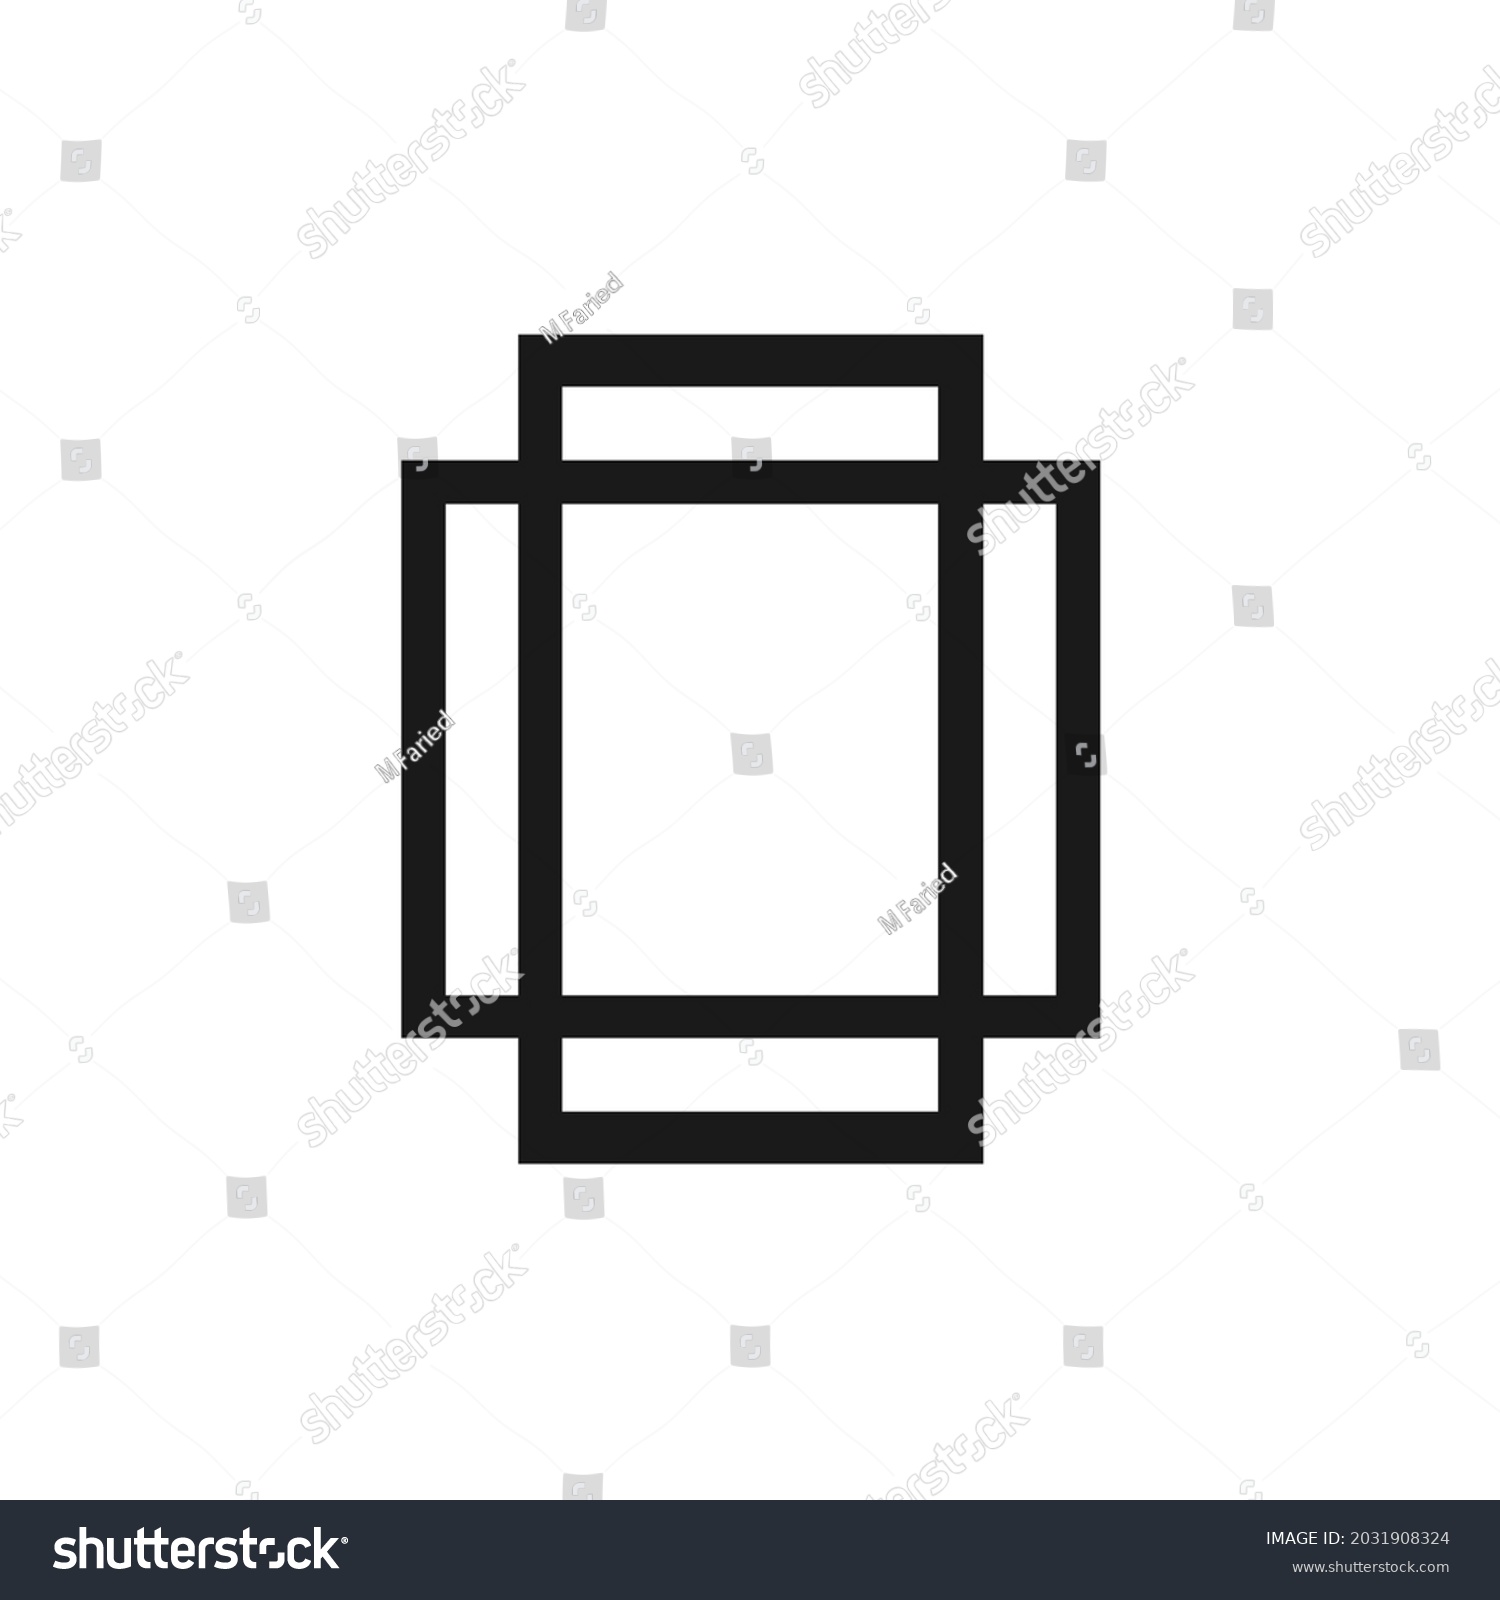 Vector Image Two Interlocking Squares Stock Vector (Royalty Free ...